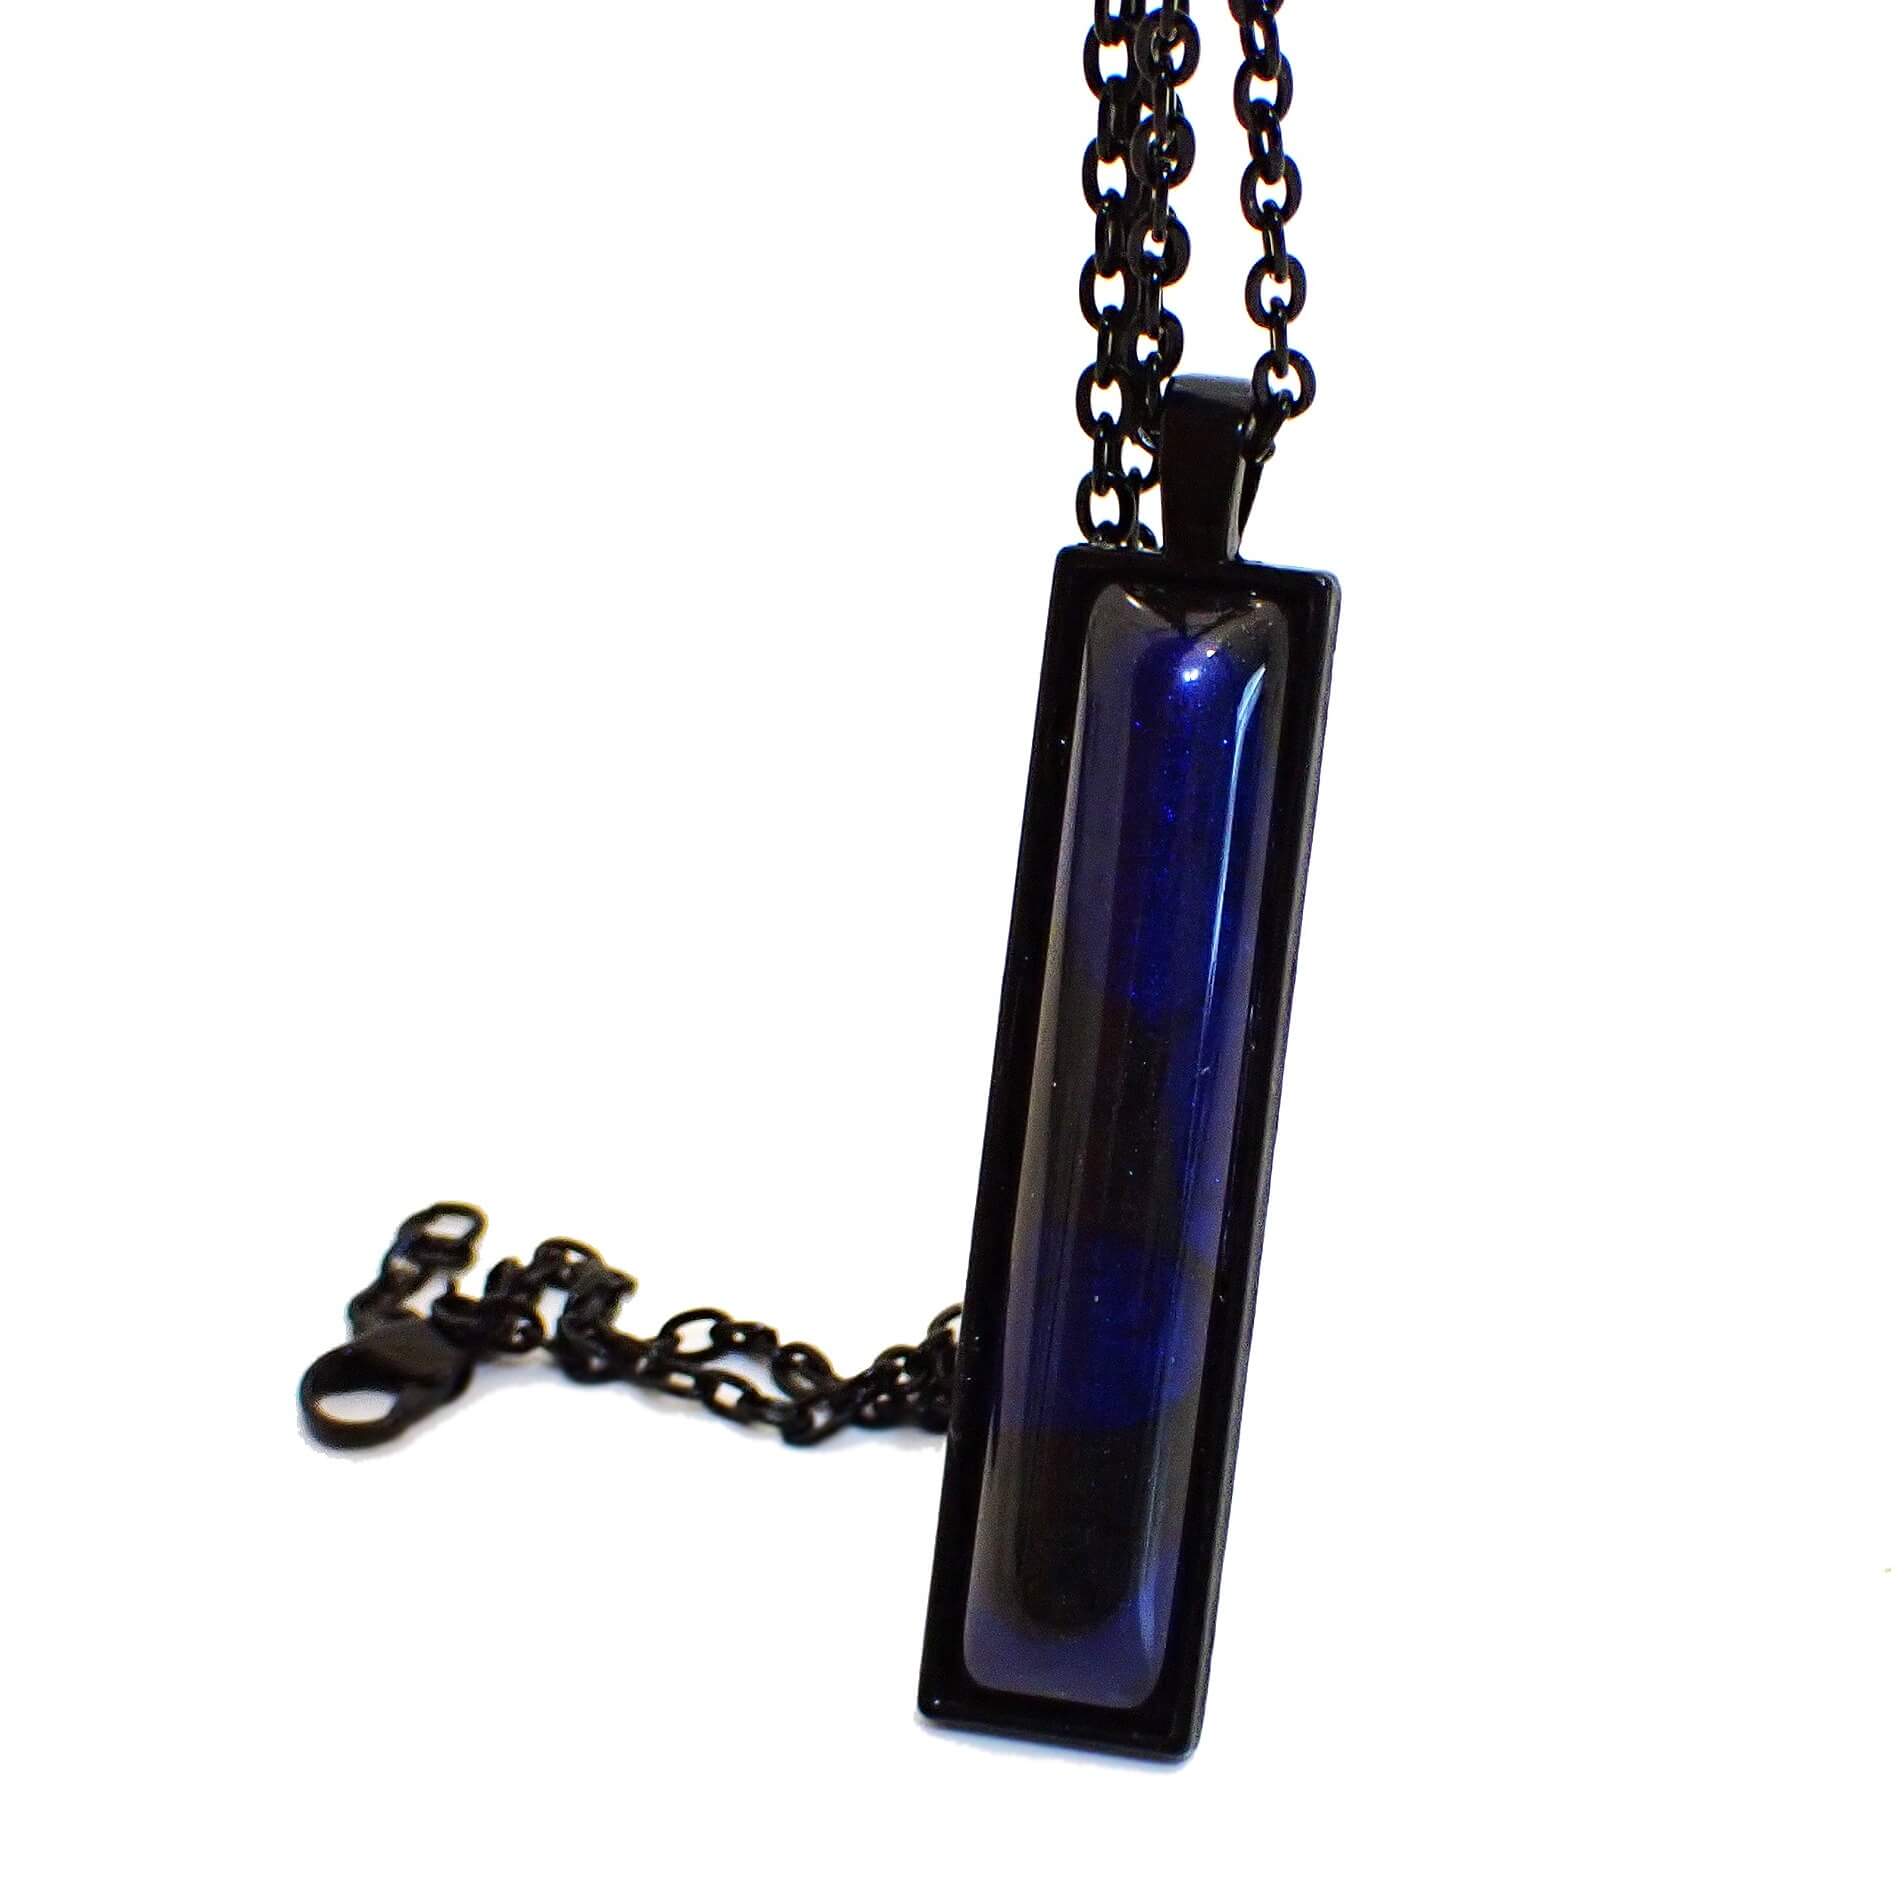 Enlarged front view of the handmade resin Goth pendant necklace. The metal is black coated. There is a long rectangle bar pendant at the bottom. The bar pendant has a handmade resin cab with marbled pearly black and deep blue colors.